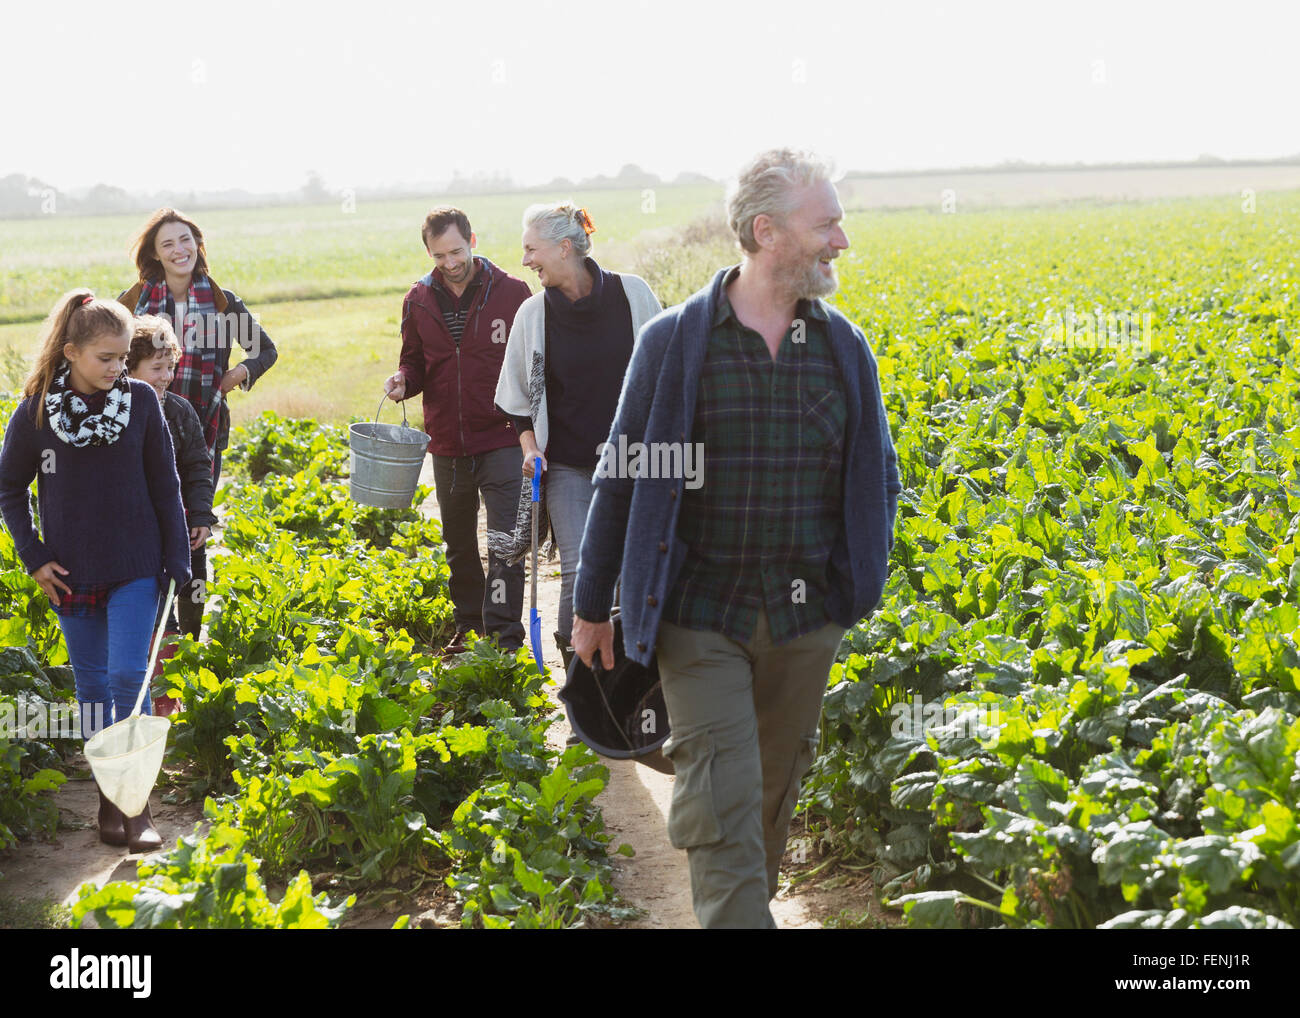 Multi-generation family walking in sunny potager Banque D'Images